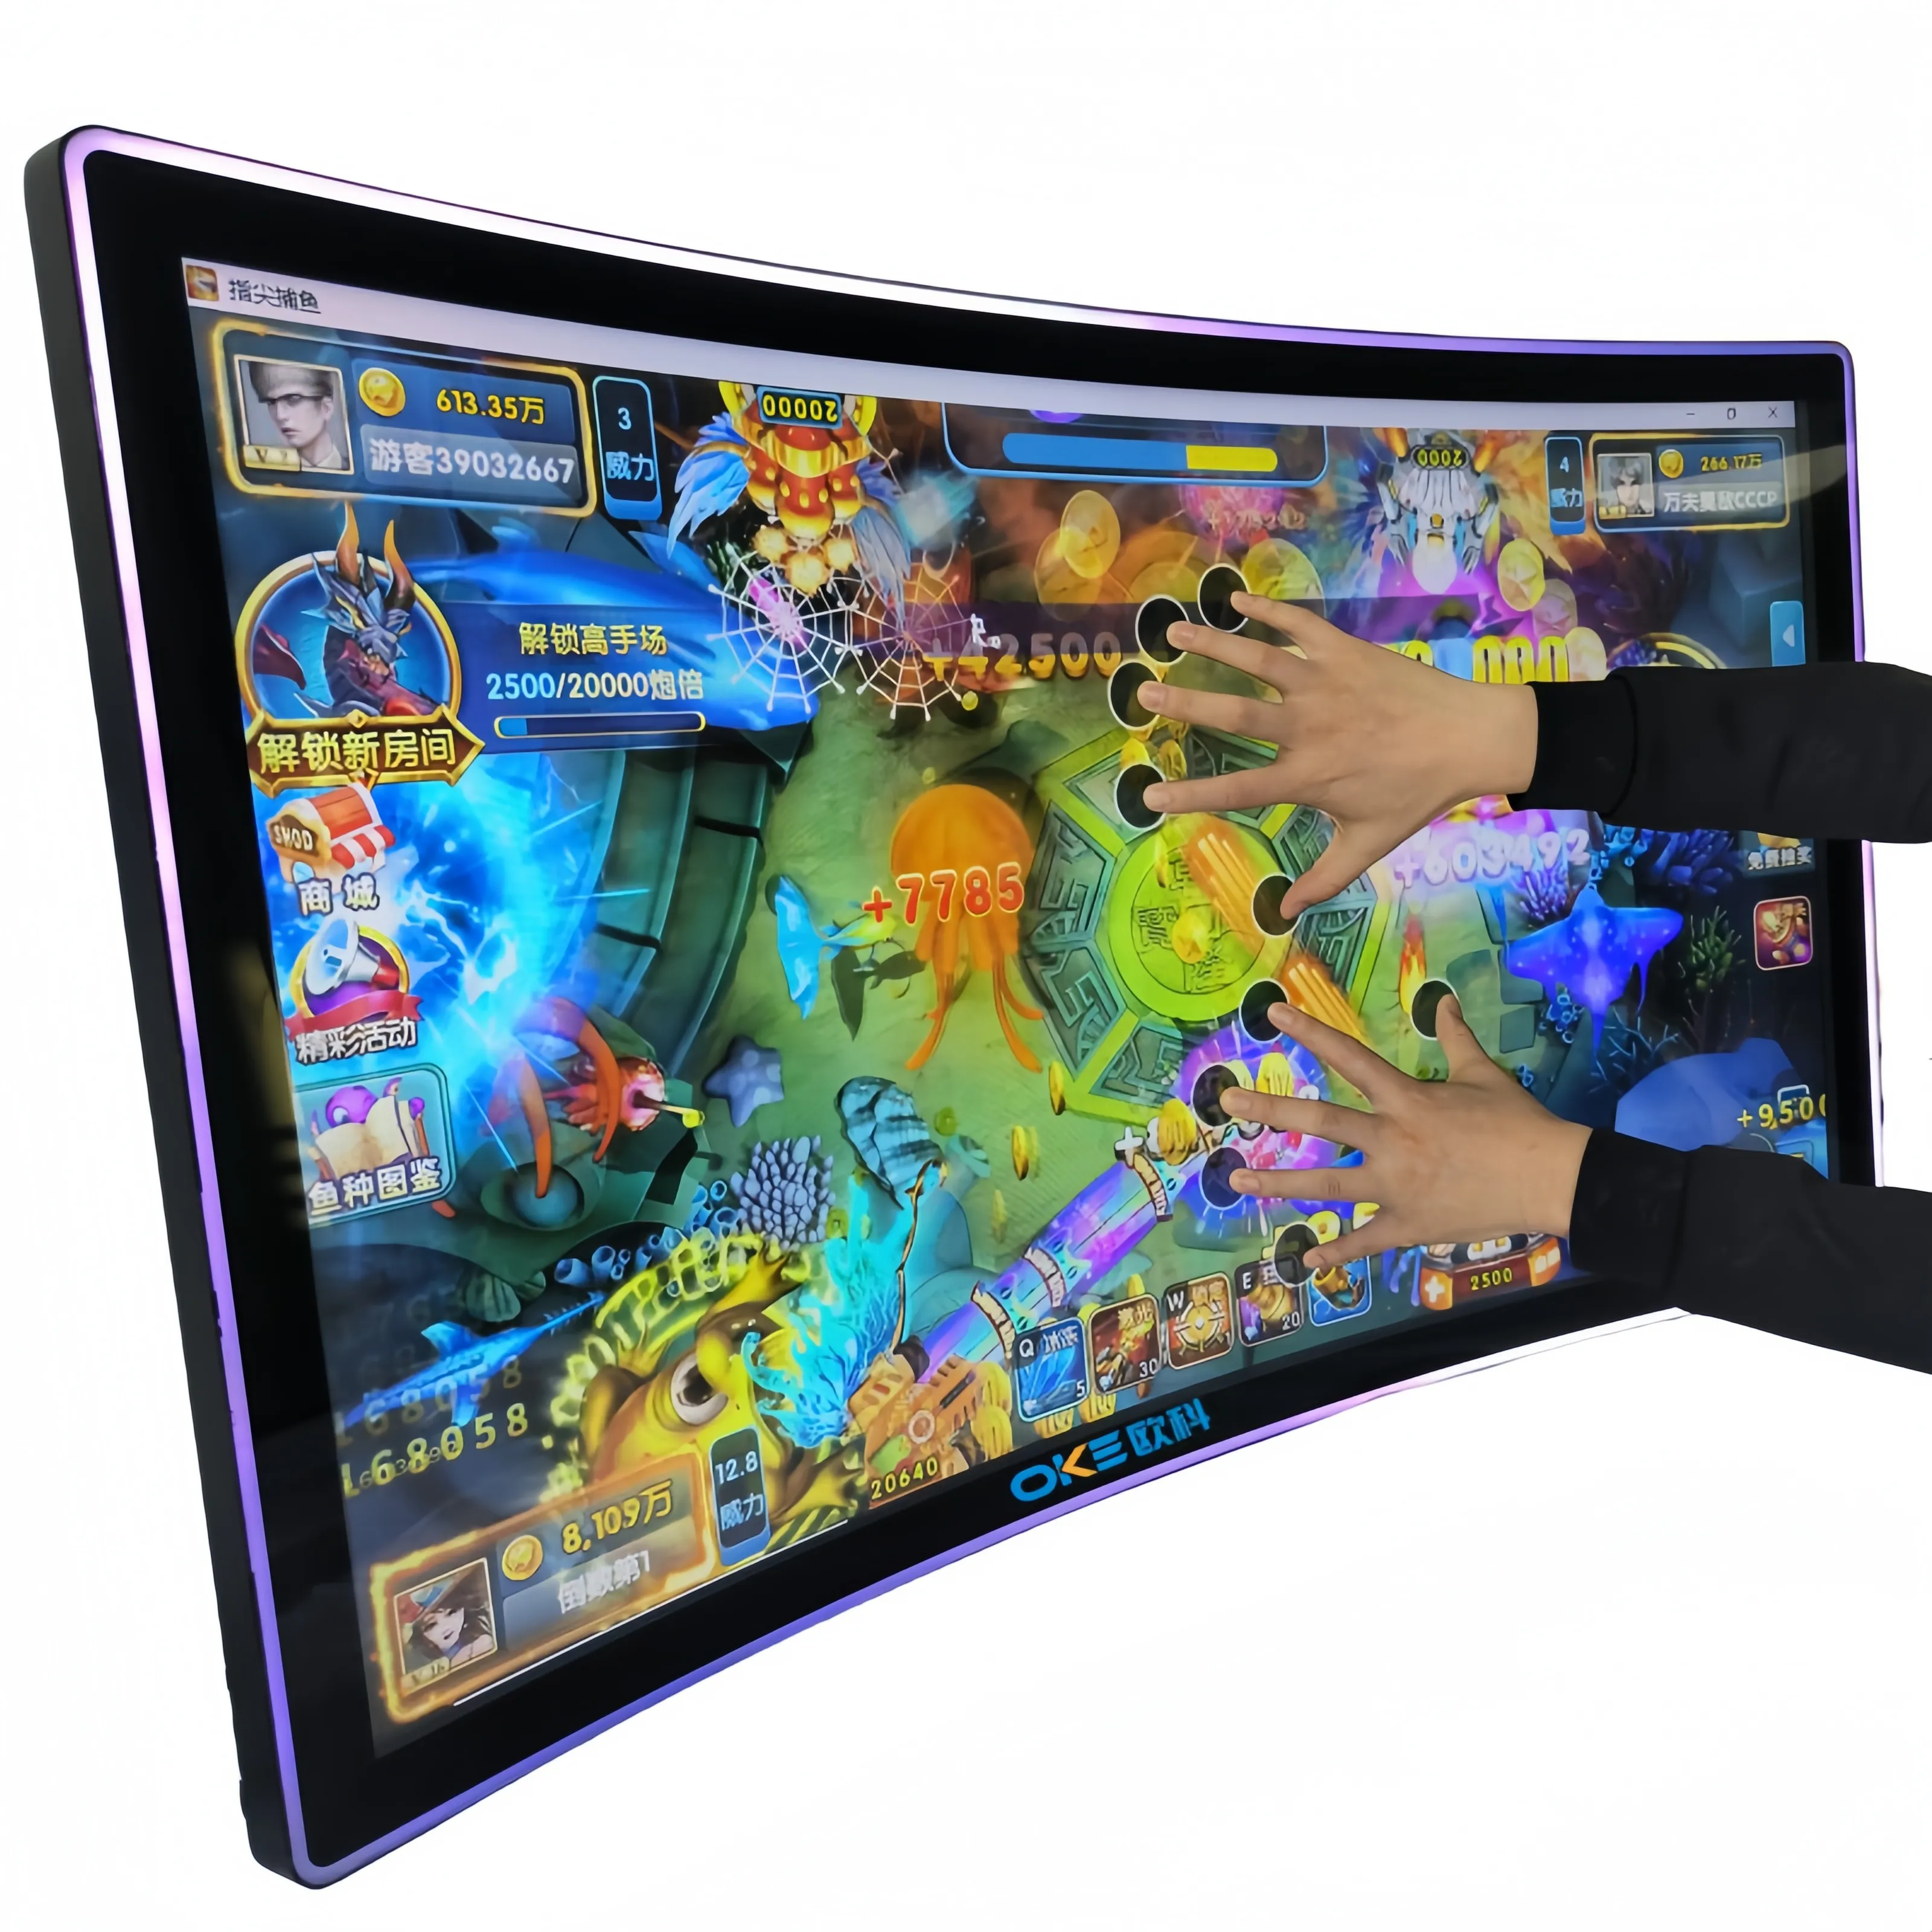 OKE 27 Zoll Pcap Capac itive Touch-Gaming-Monitor Bildschirm LCD-Display optional Gebogener Bildschirm C/S-gebogener Bildschirm Vertikales Panel